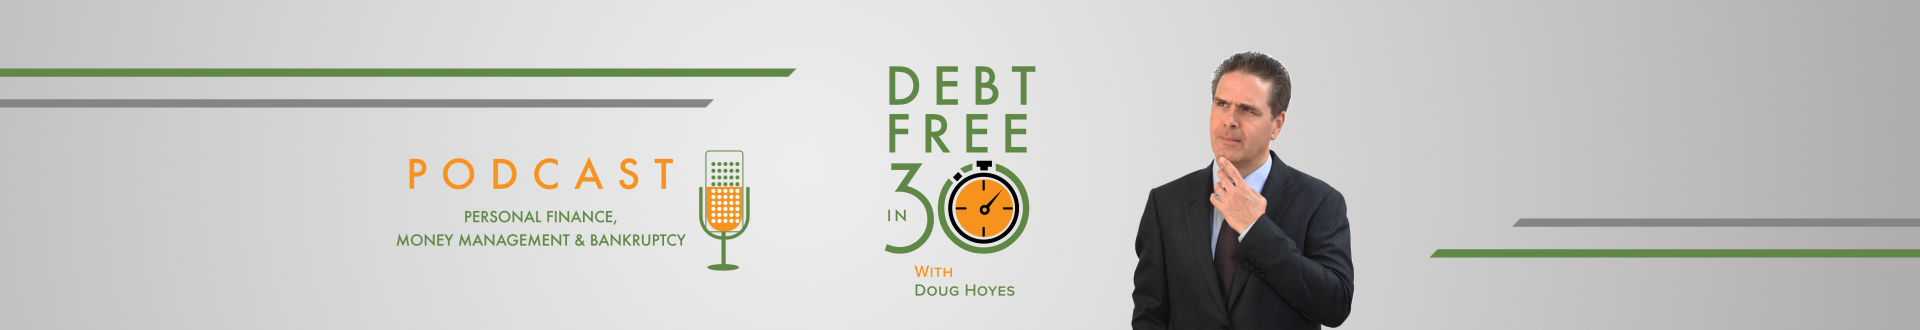 Debt Free in 30 Podcast Archive - Page 42